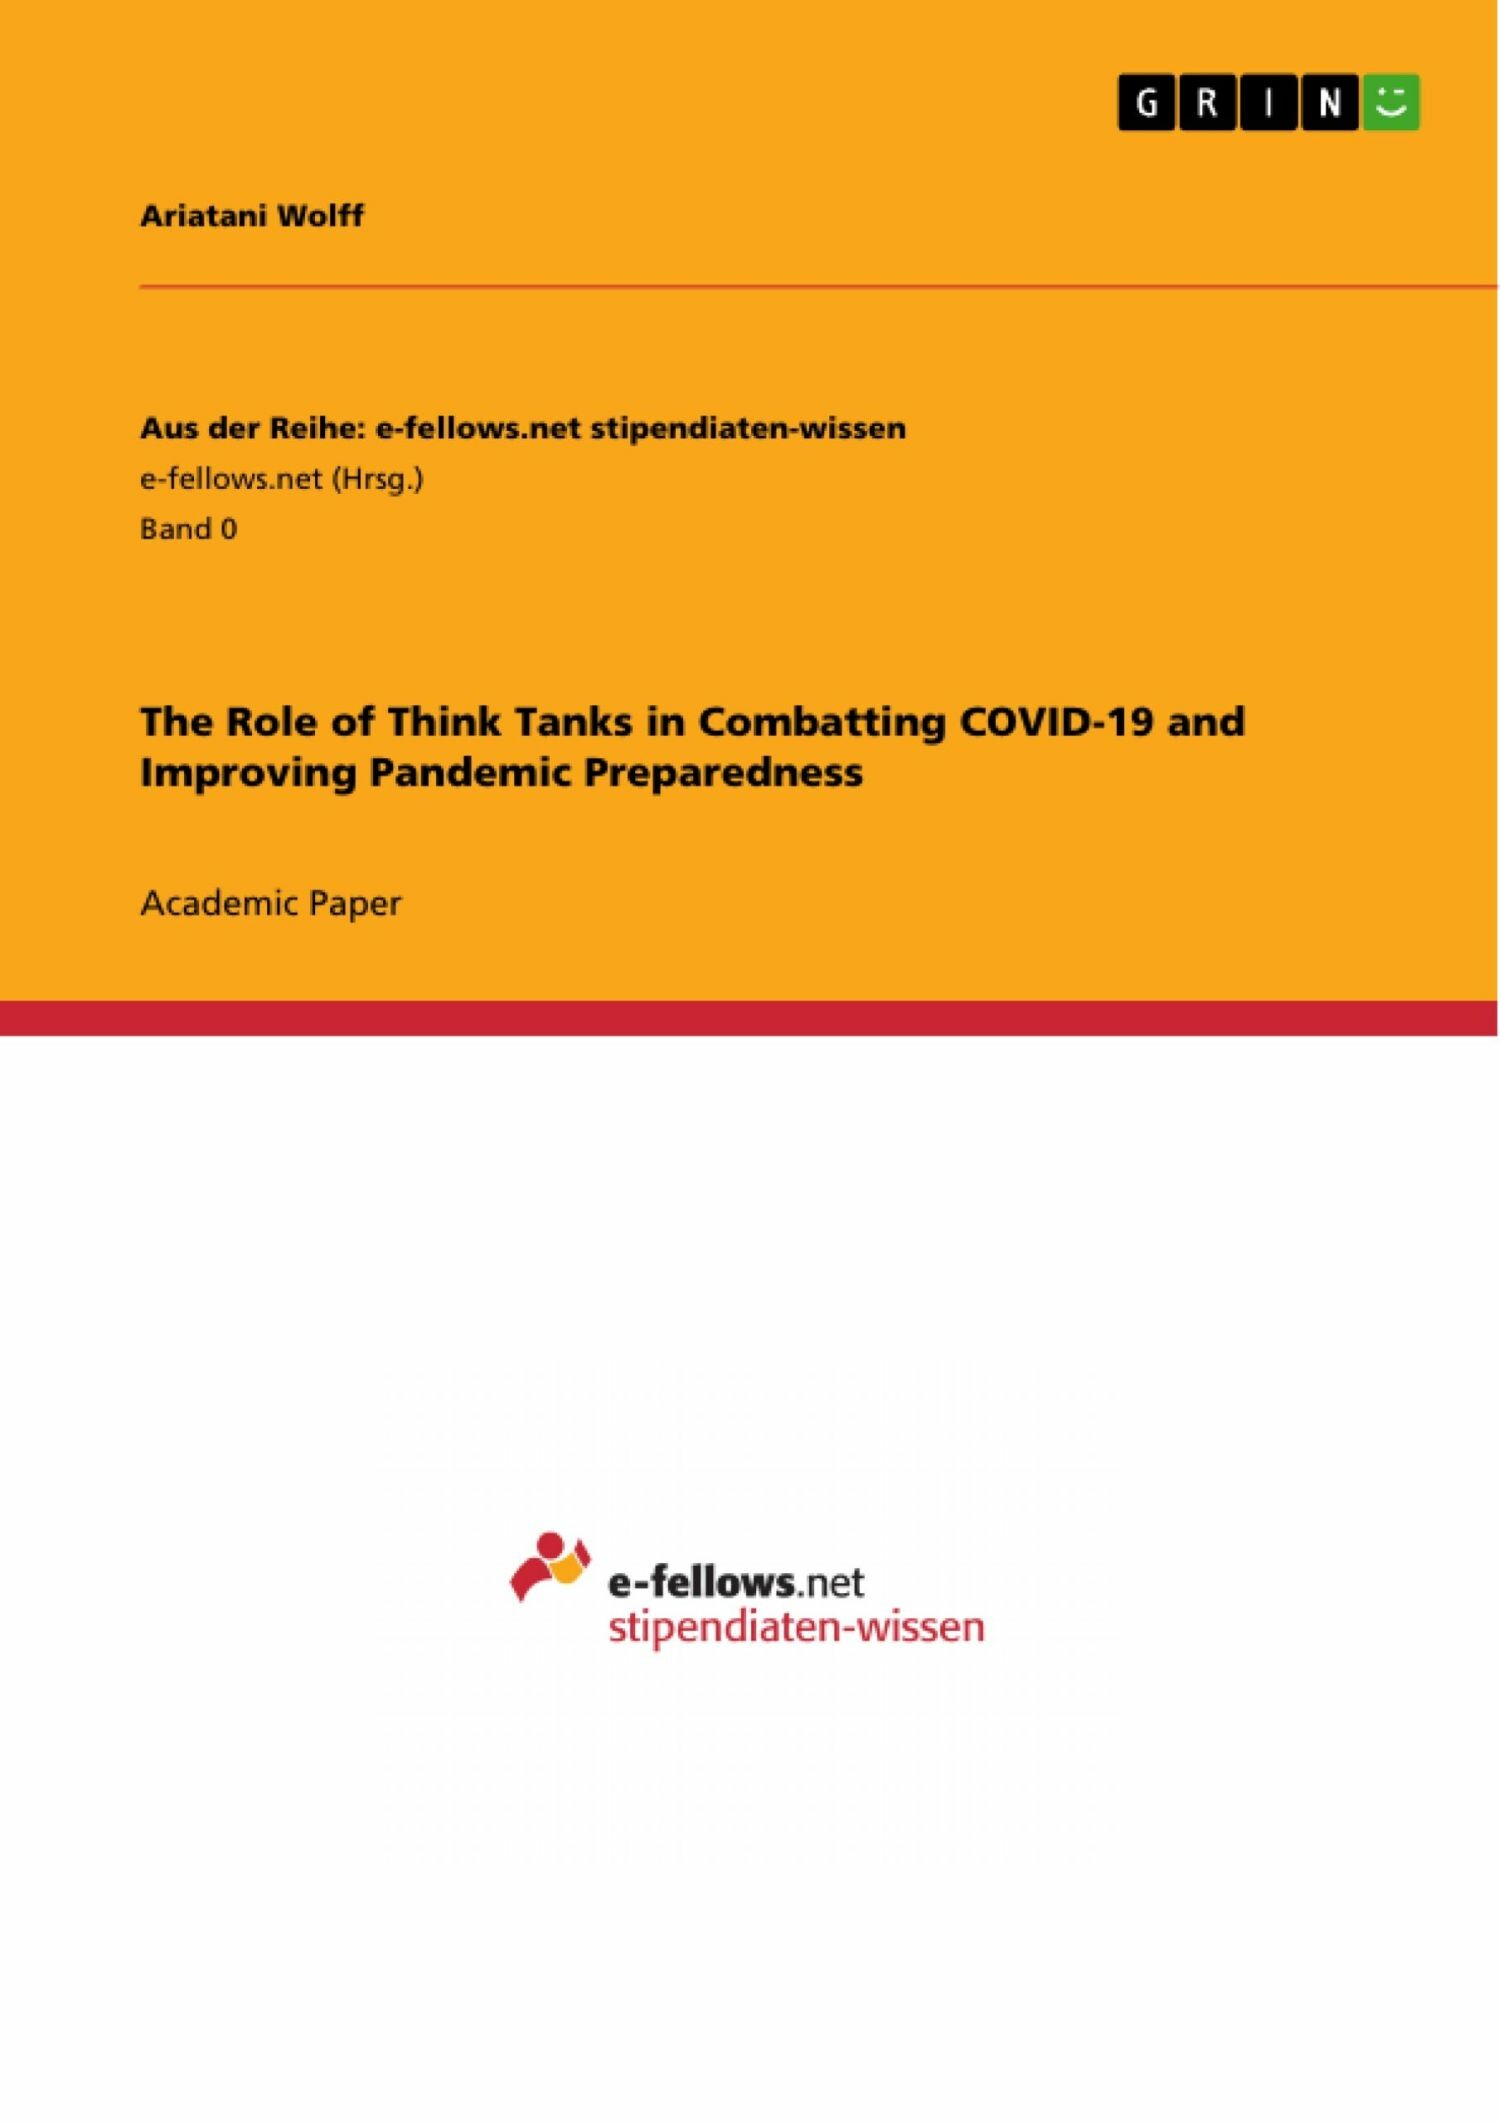 The Role of Think Tanks in Combatting COVID-19 and Improving Pandemic Preparedness